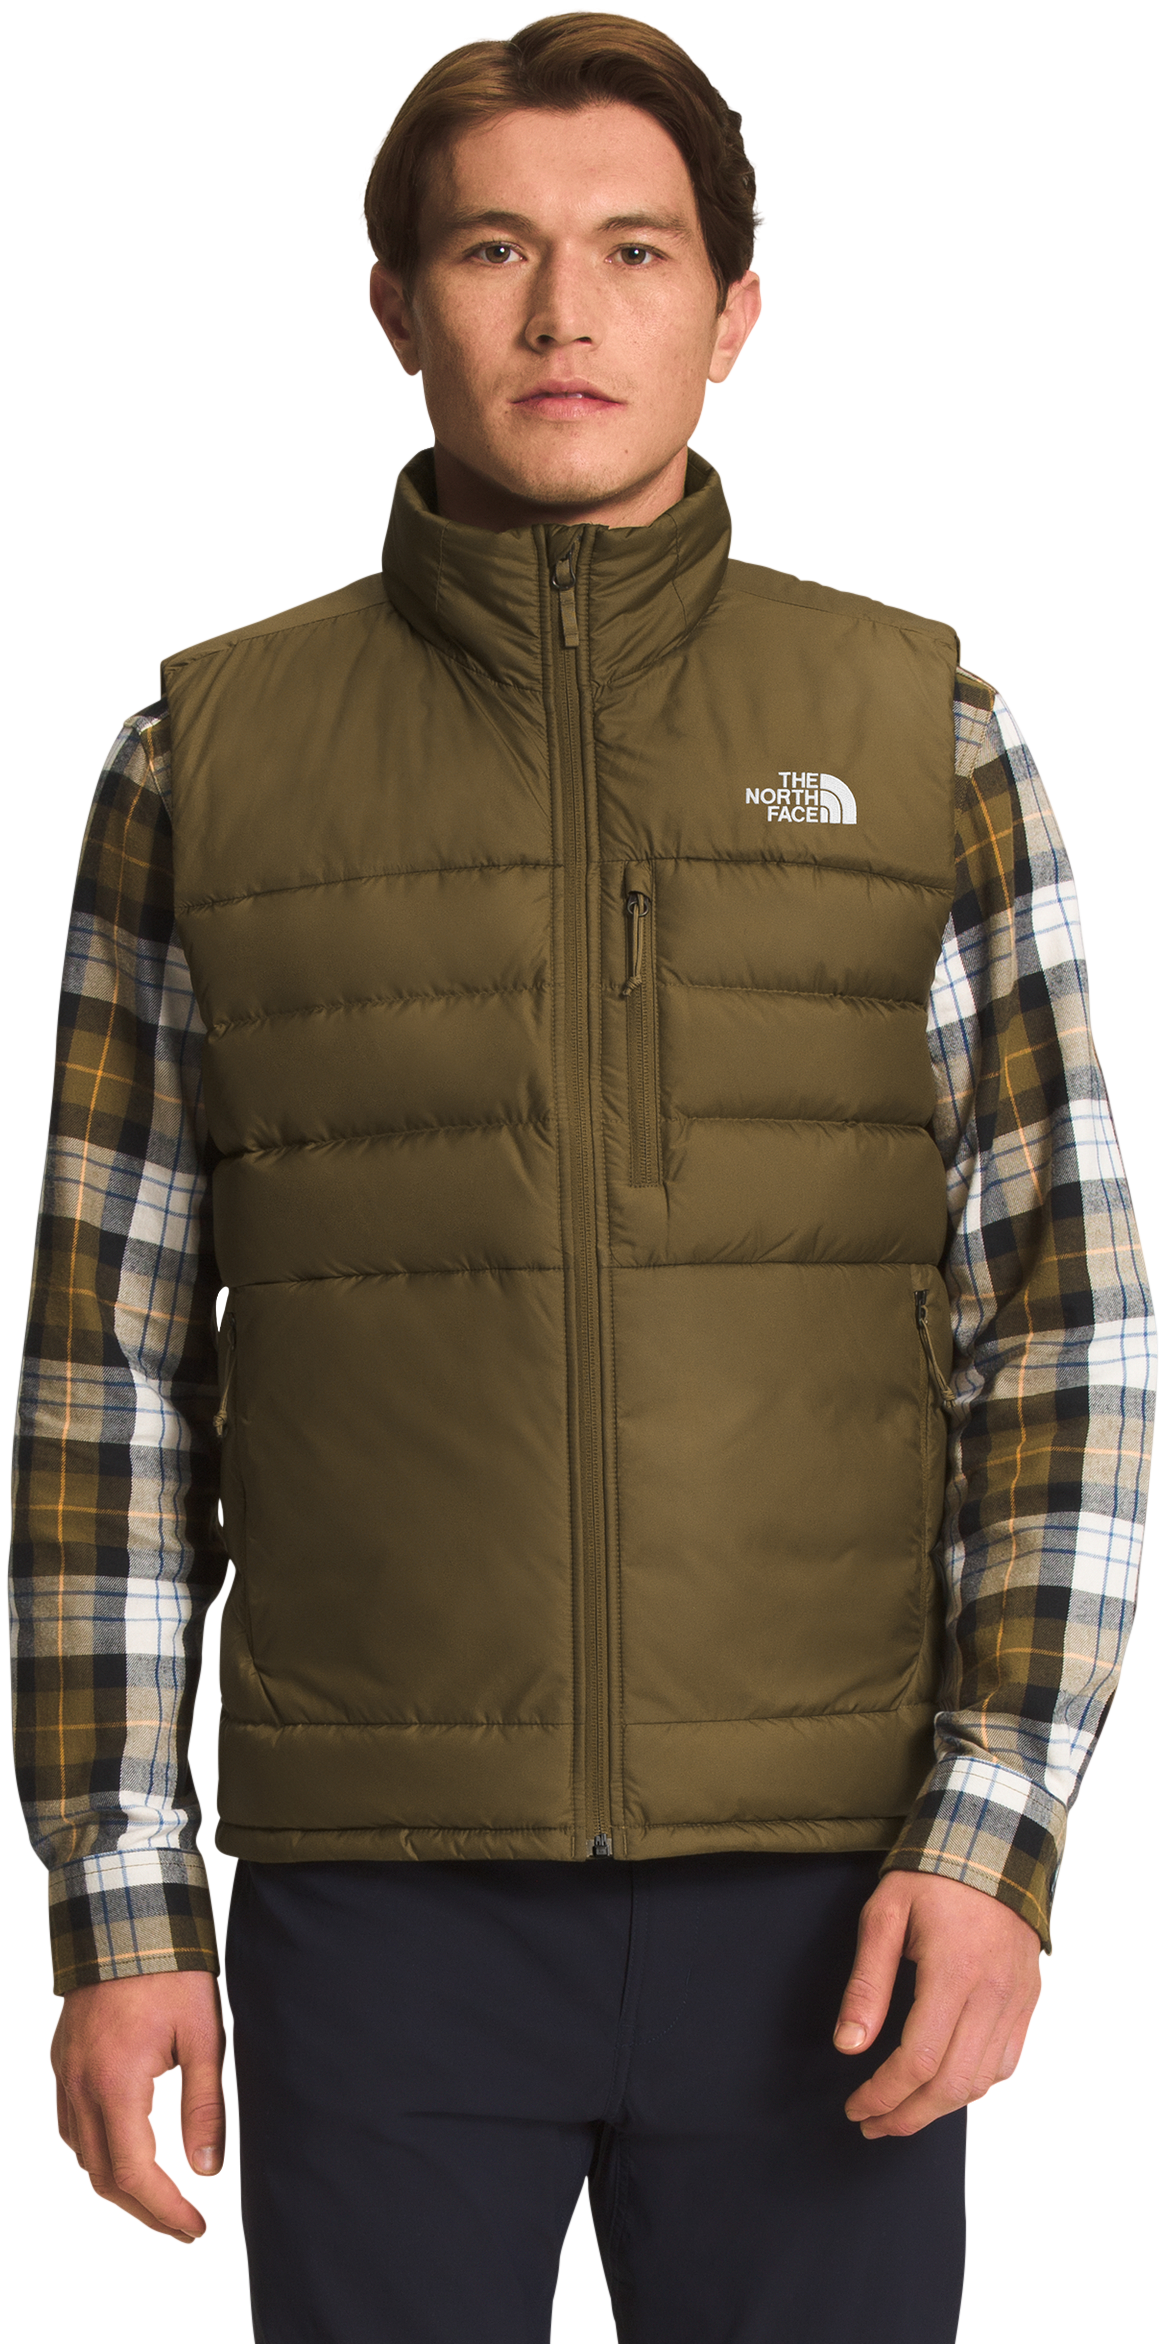 The North Face Aconcagua 2 Vest for Men - Military Olive - 2XL